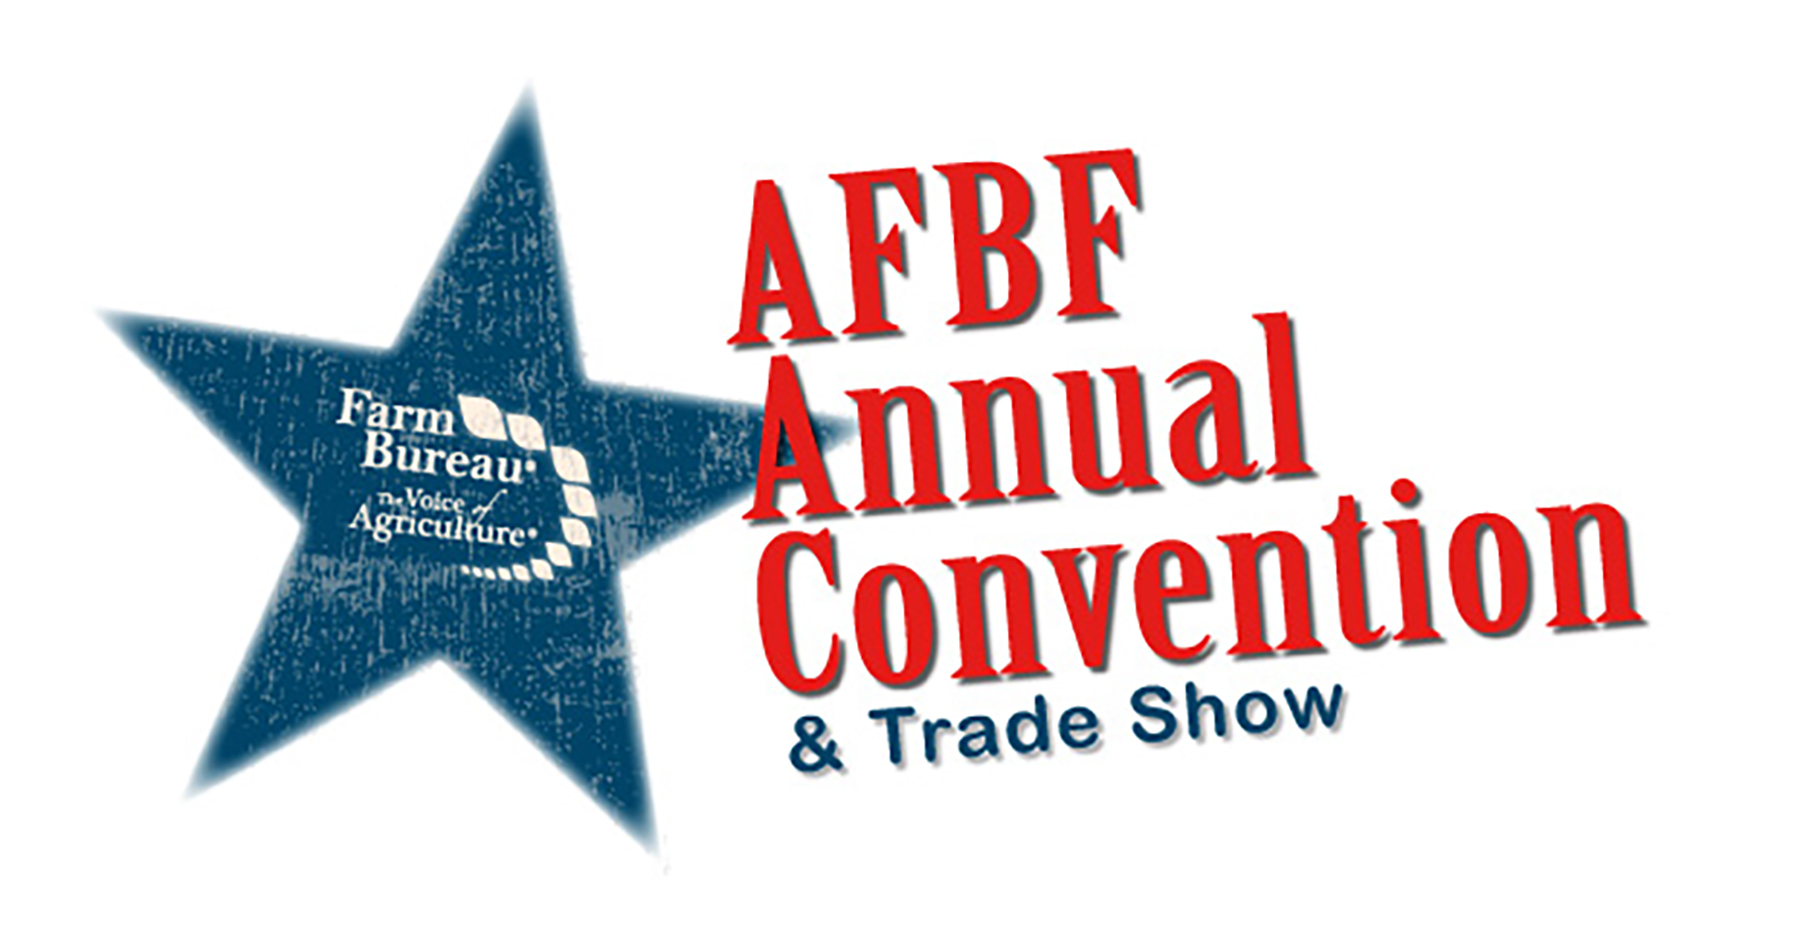 Registration open for AFBF convention